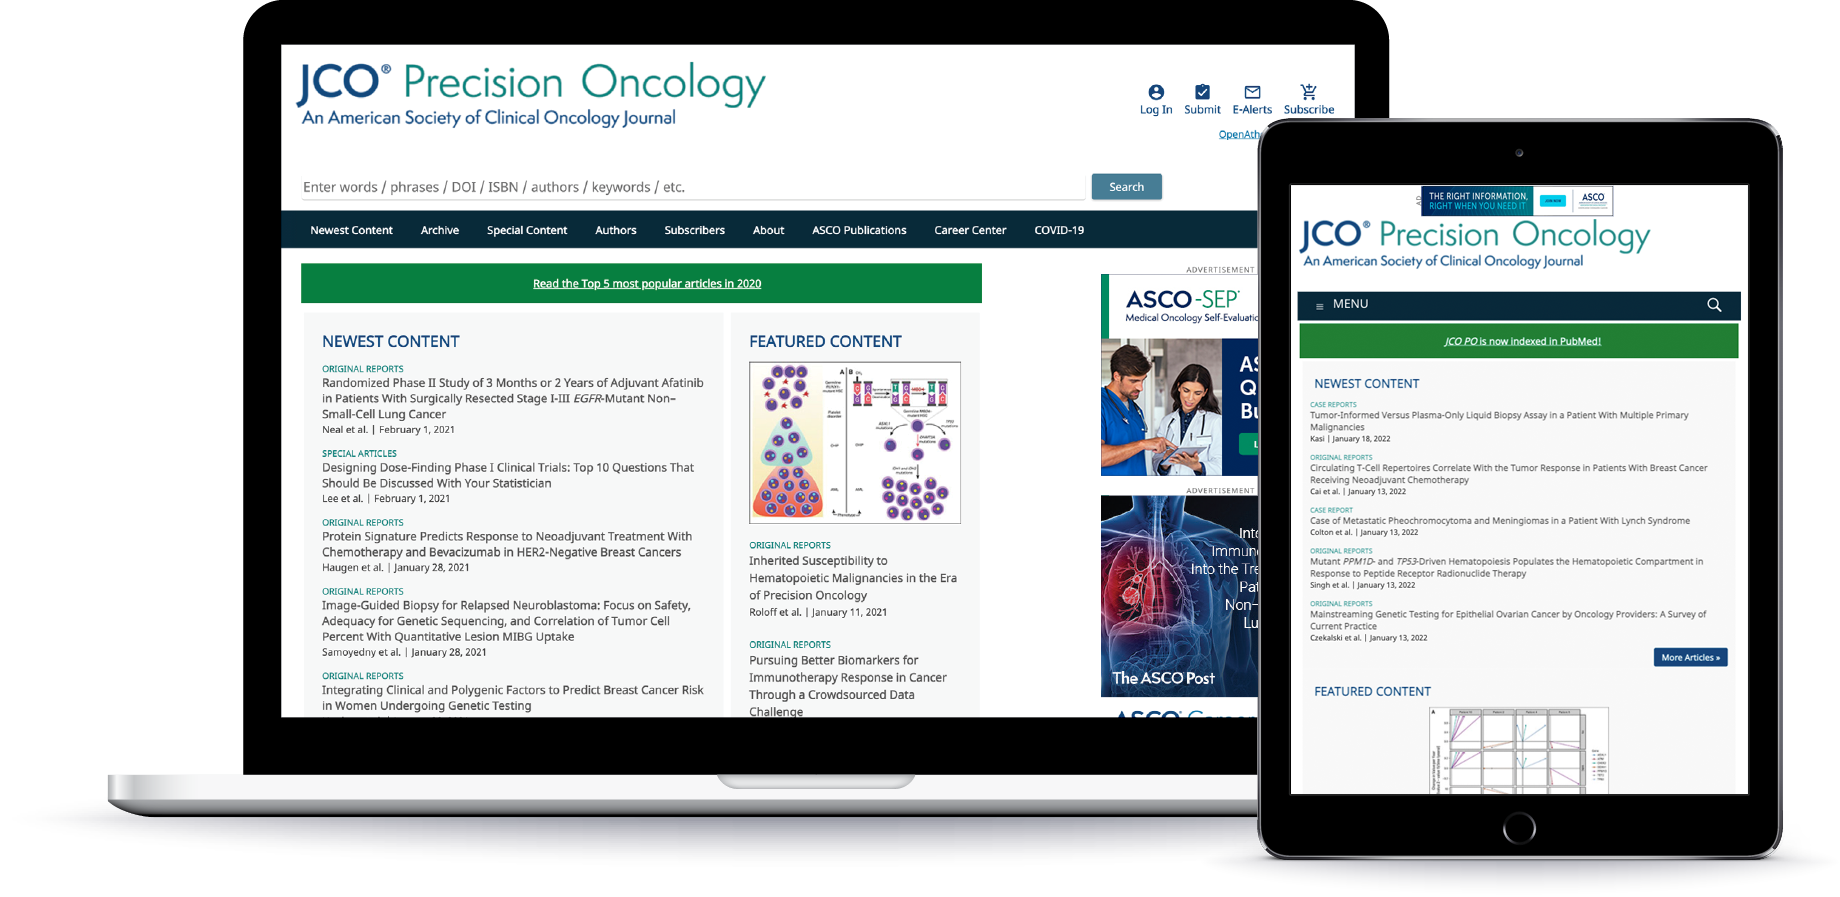 JCO Precision Oncology Product Image